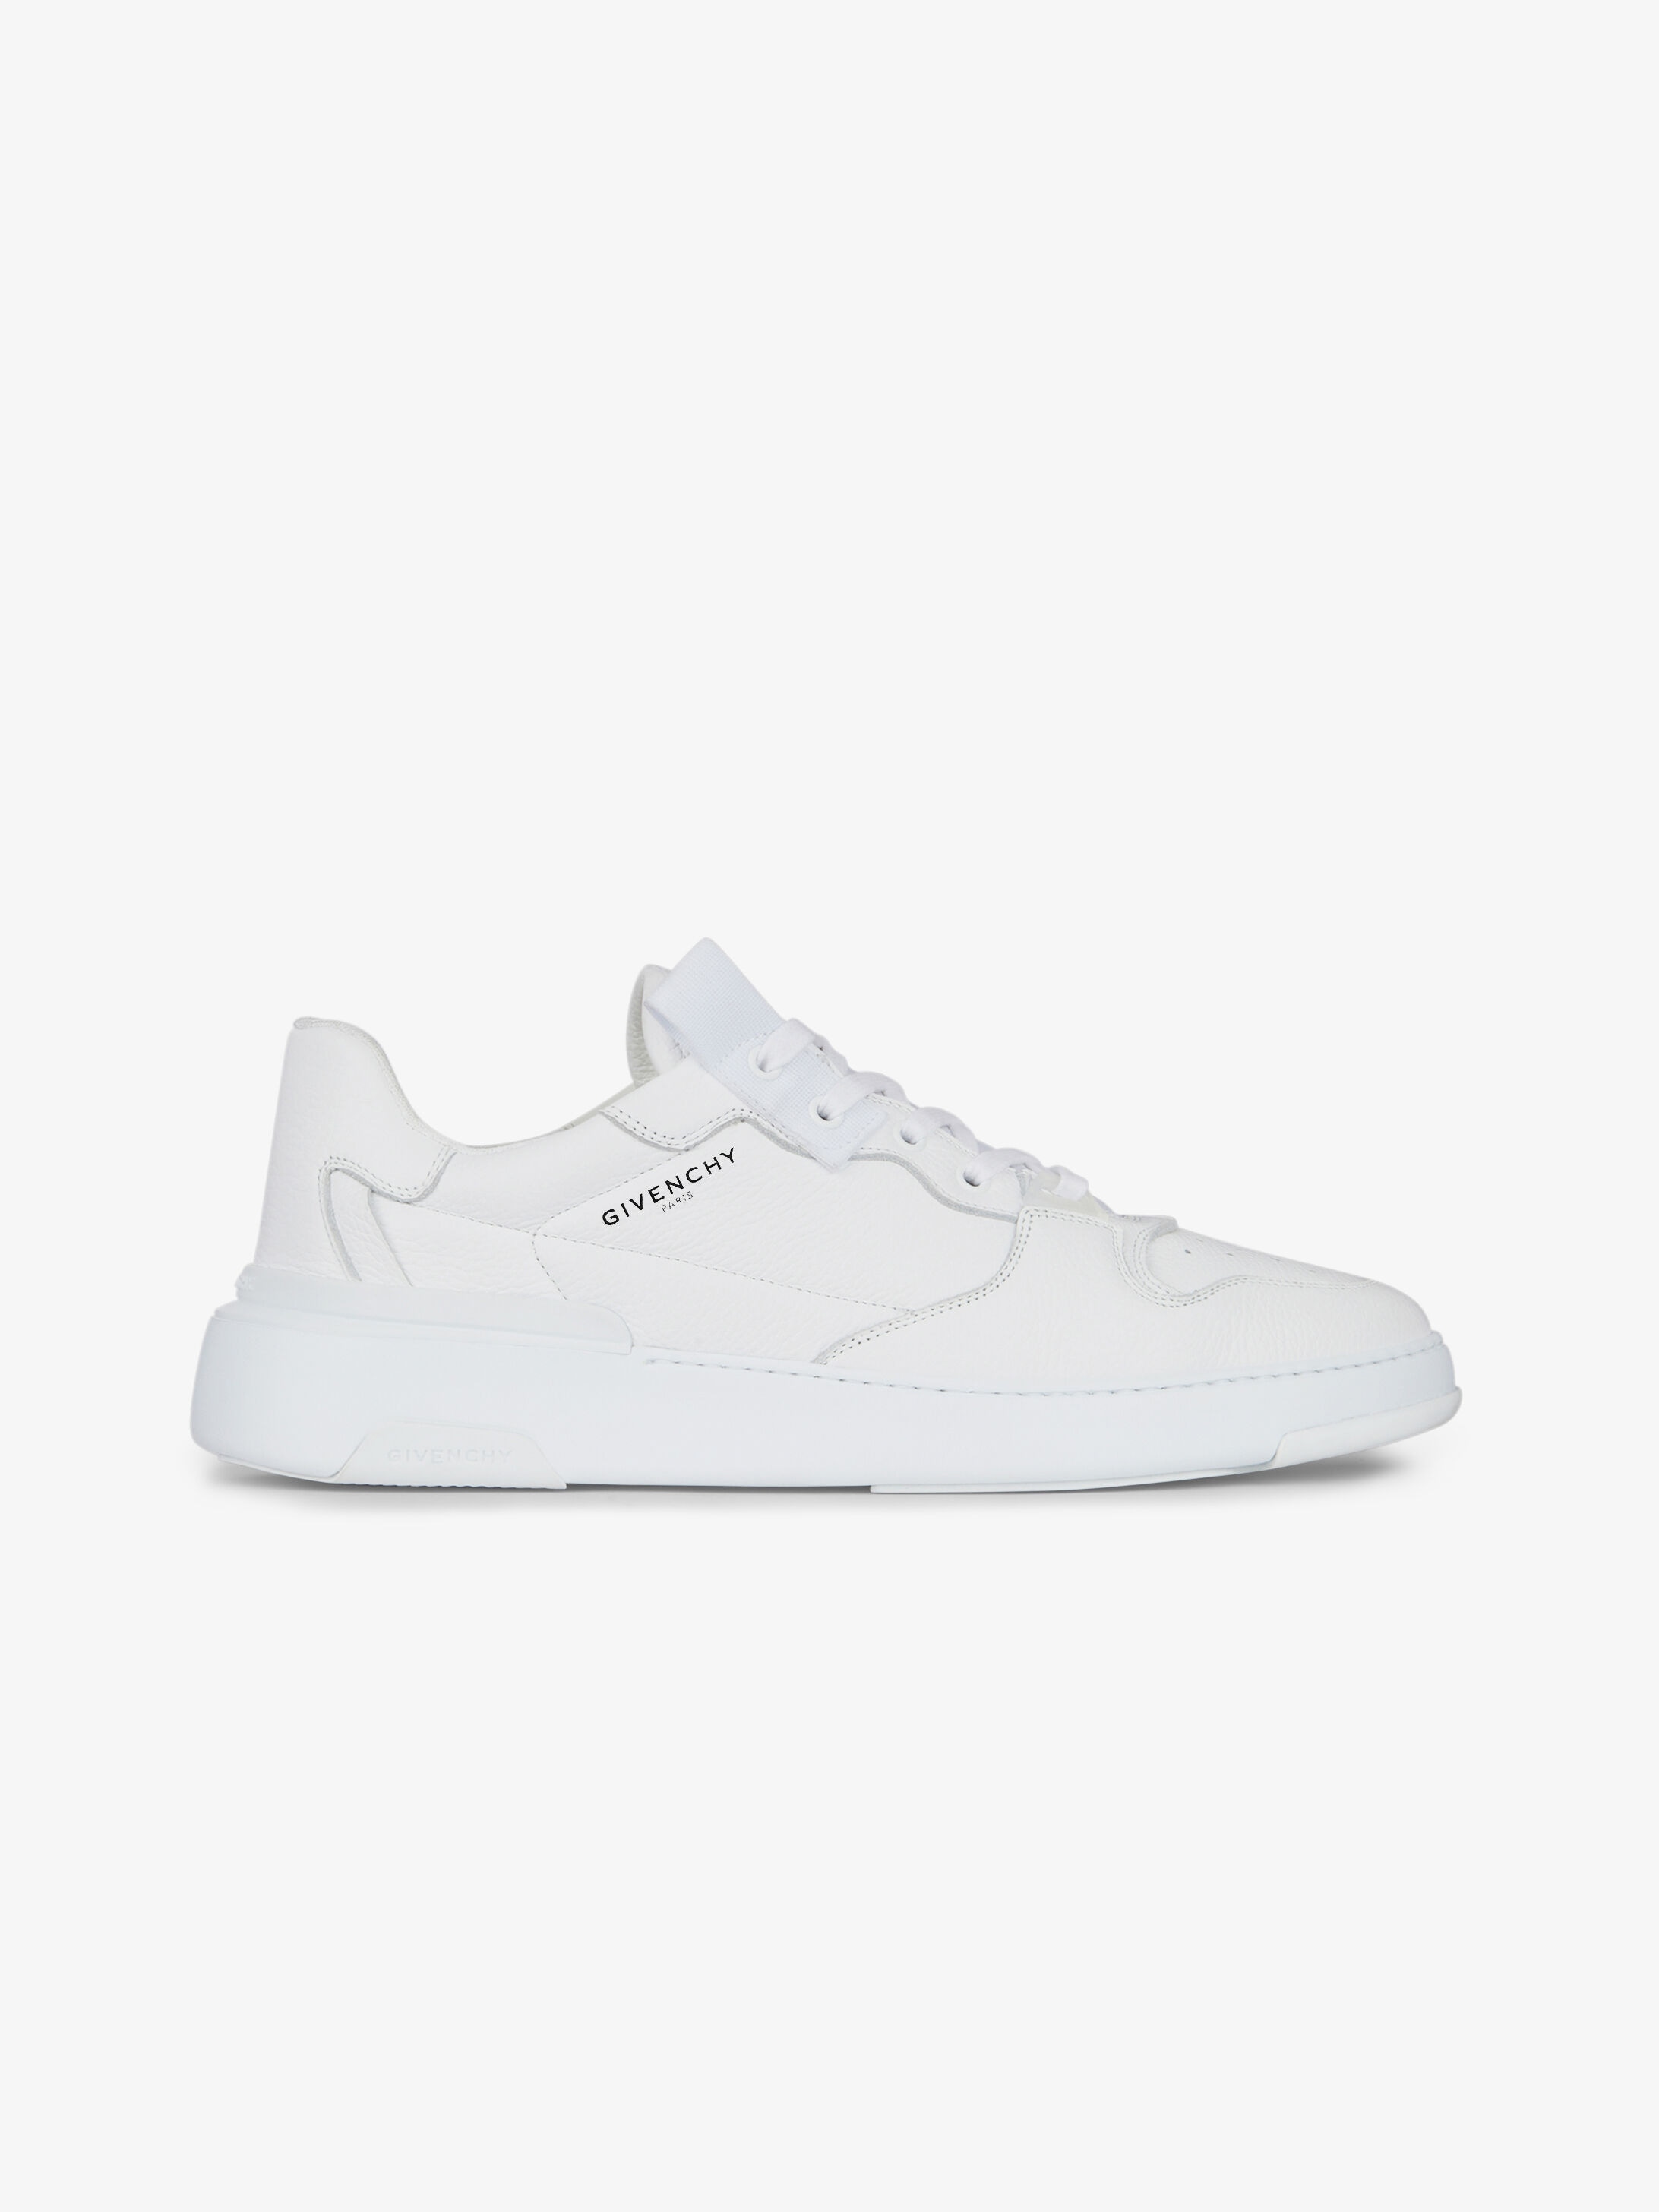 all white givenchy sneakers